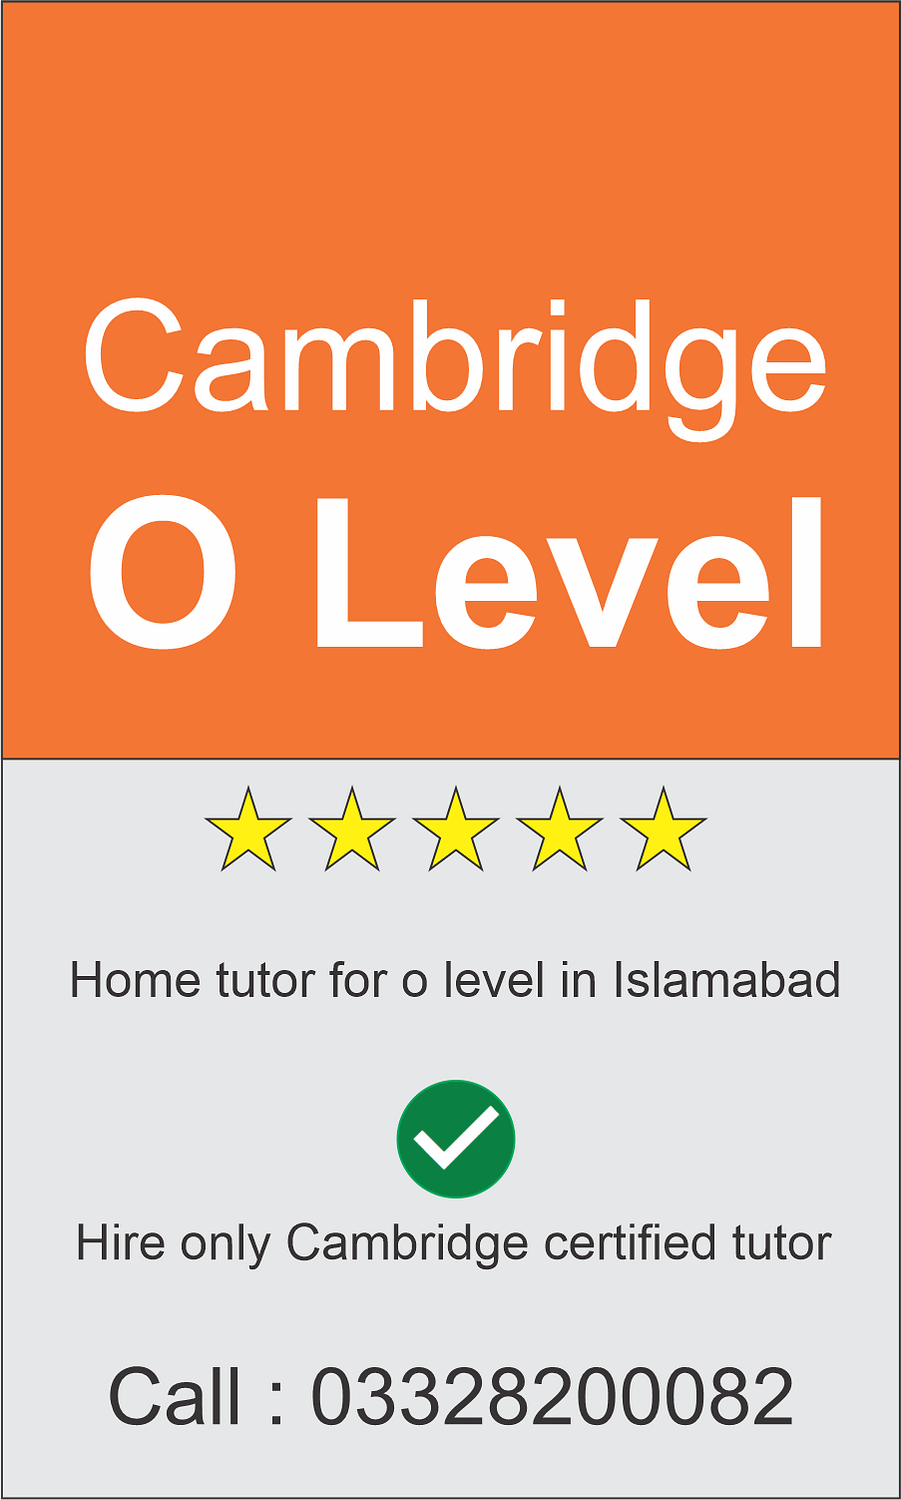 Home tutor for o level in Islamabad